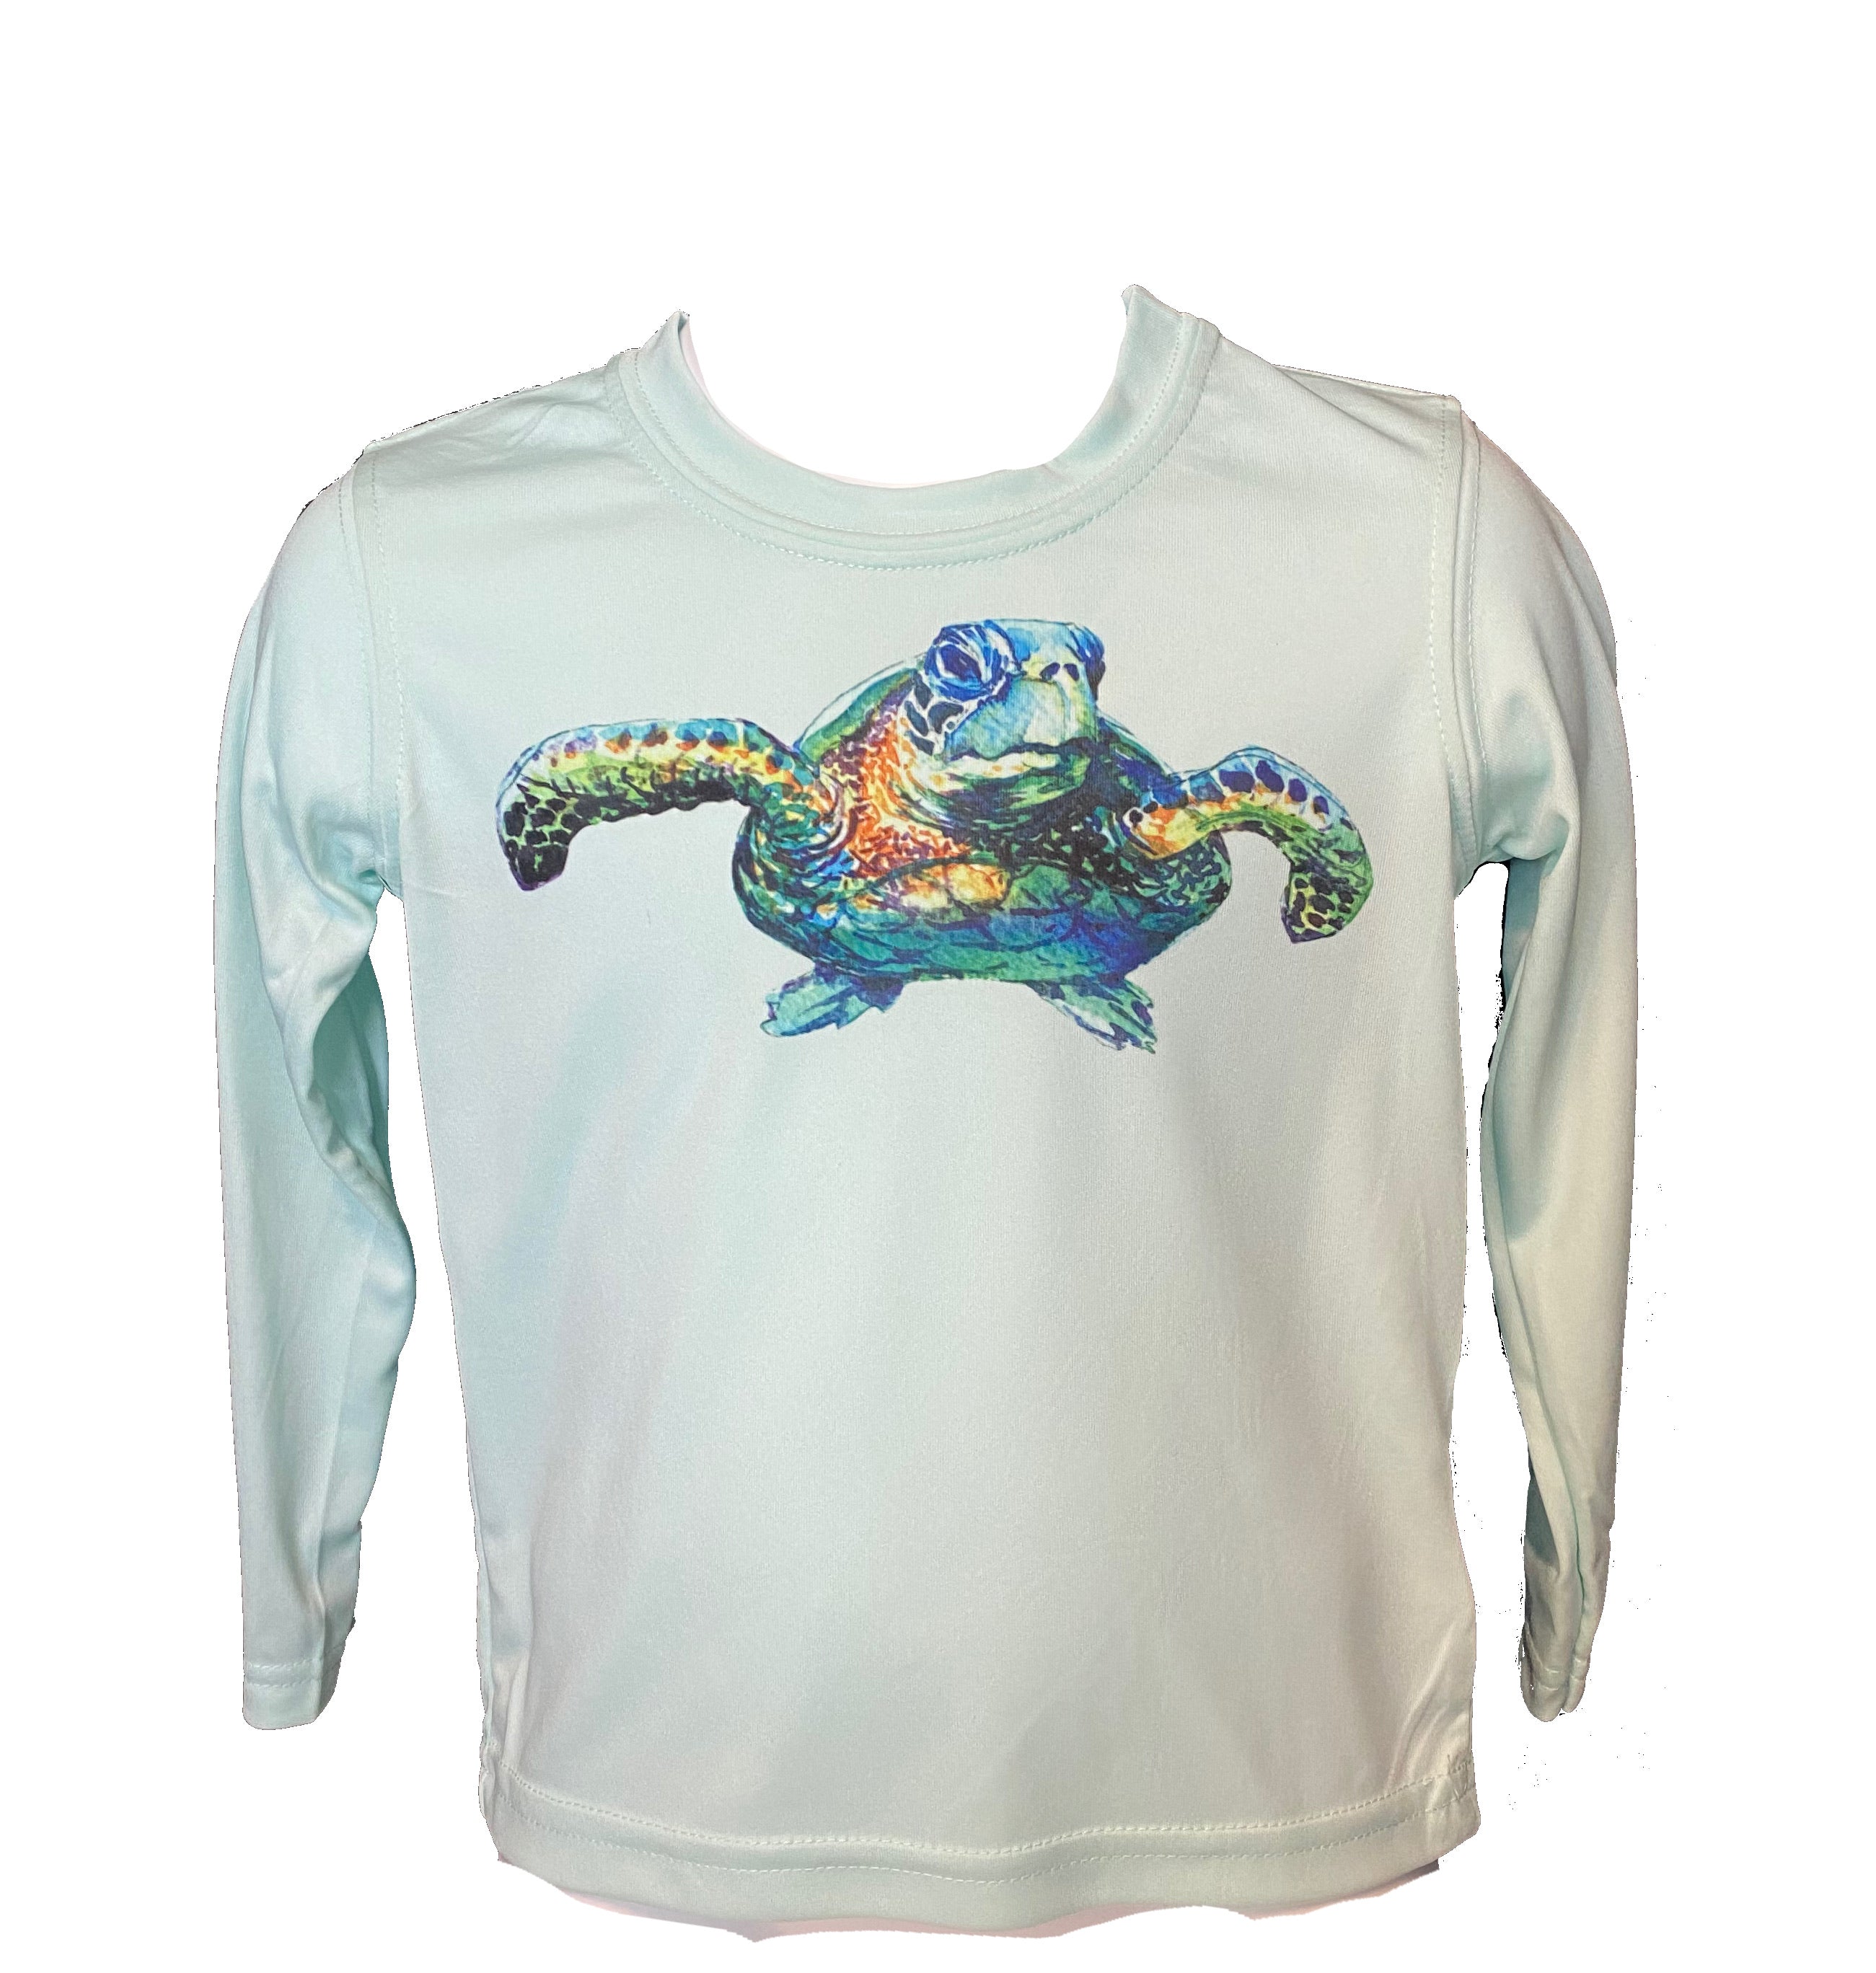 Sporty Girl Toddler Sea Turtle UPF LS